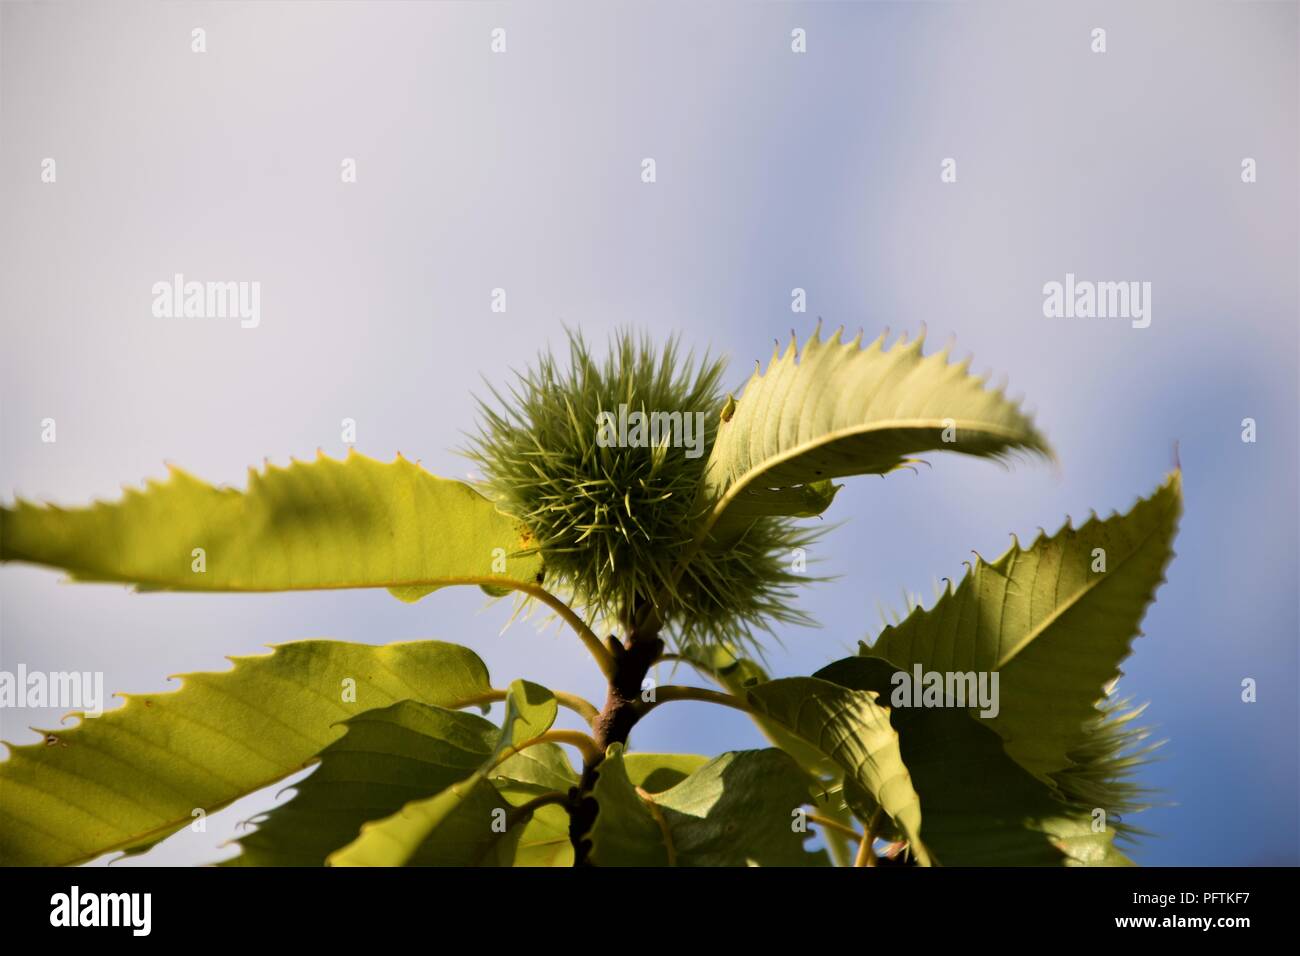 Green chestnuts in a thorny shell on the tree branch surrounded by green leaves, selective focus against the blue sky blurred Stock Photo